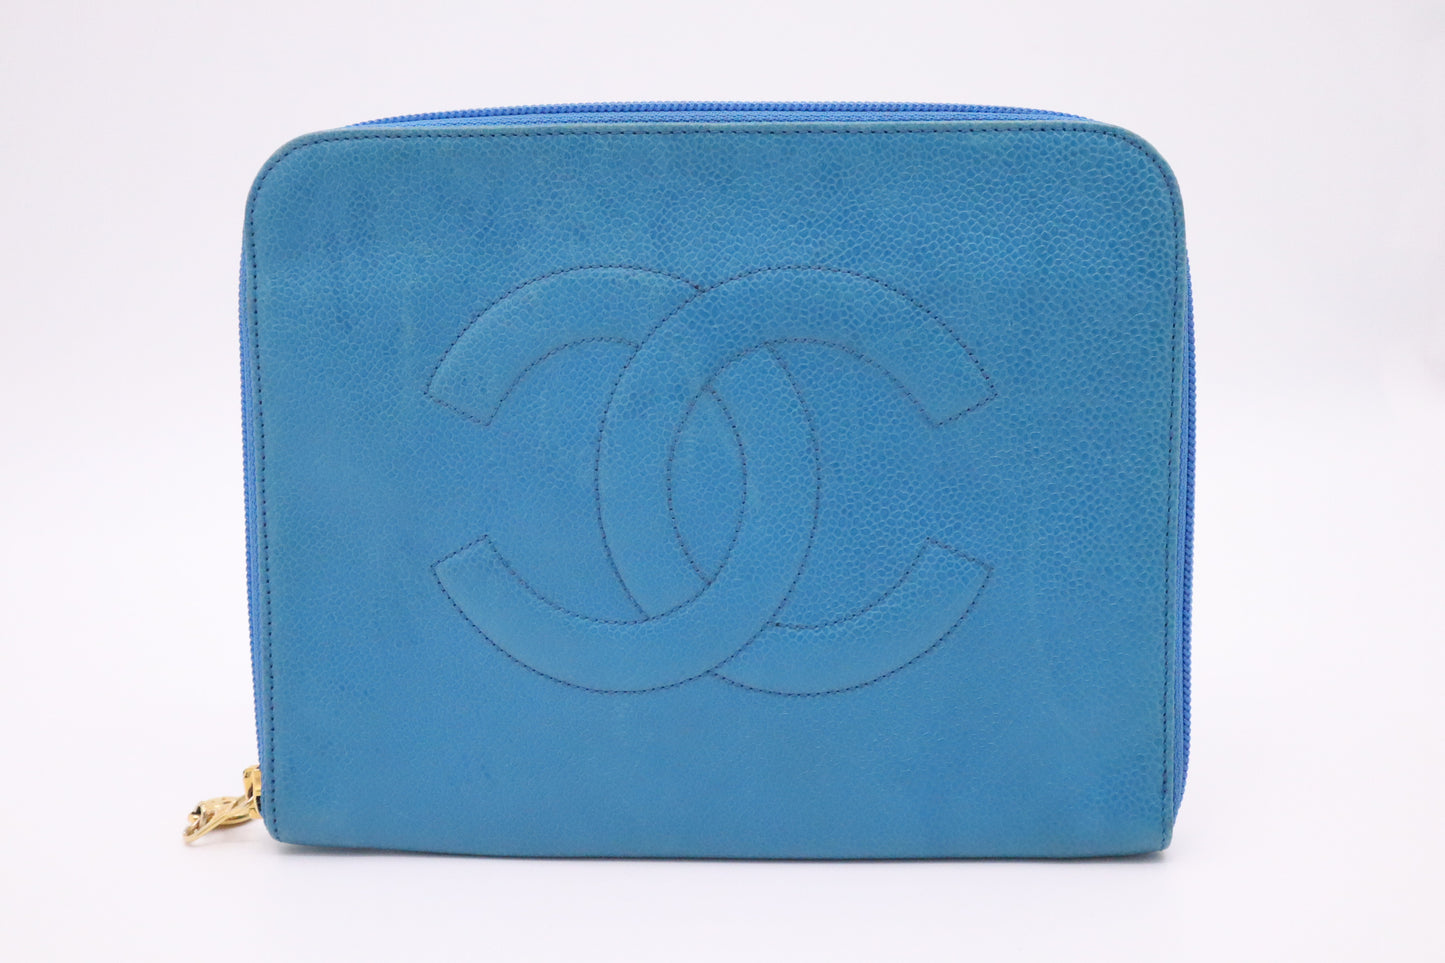 Chanel Clutch in Blue Caviar Leather